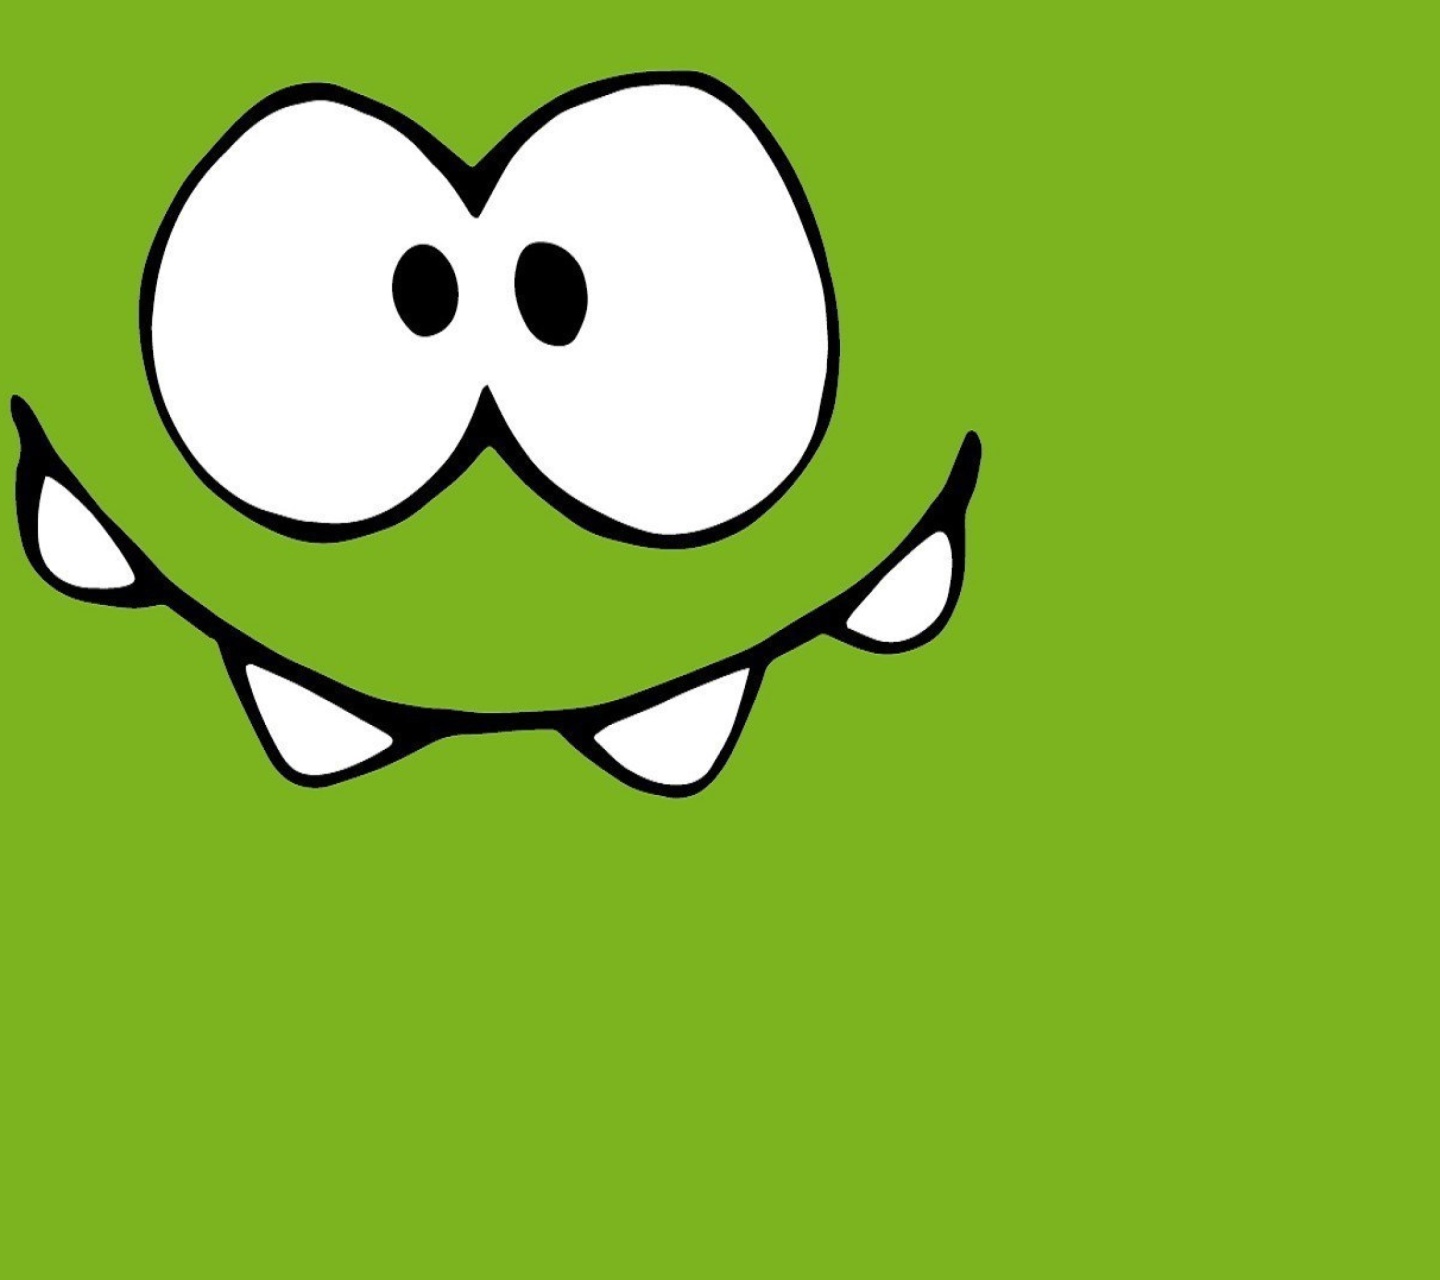 Om Nom from game Cut the Rope screenshot #1 1440x1280